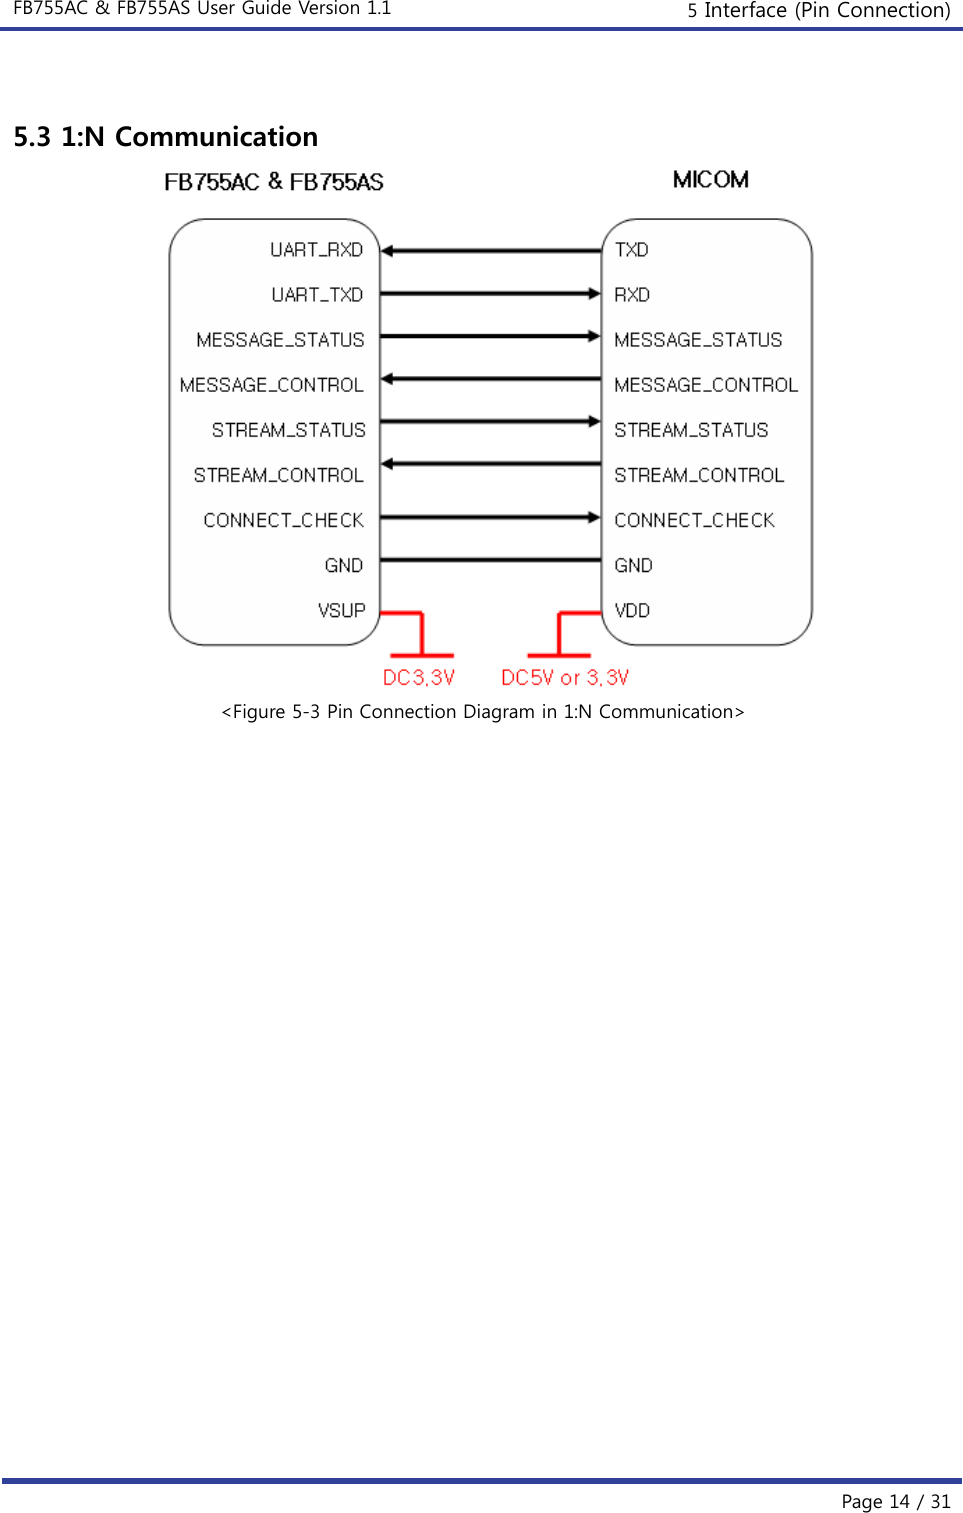 FB755AC &amp; FB755AS User Guide Version 1.1  5 Interface (Pin Connection)  Page 14 / 31  5.3 1:N Communication  &lt;Figure 5-3 Pin Connection Diagram in 1:N Communication&gt;  